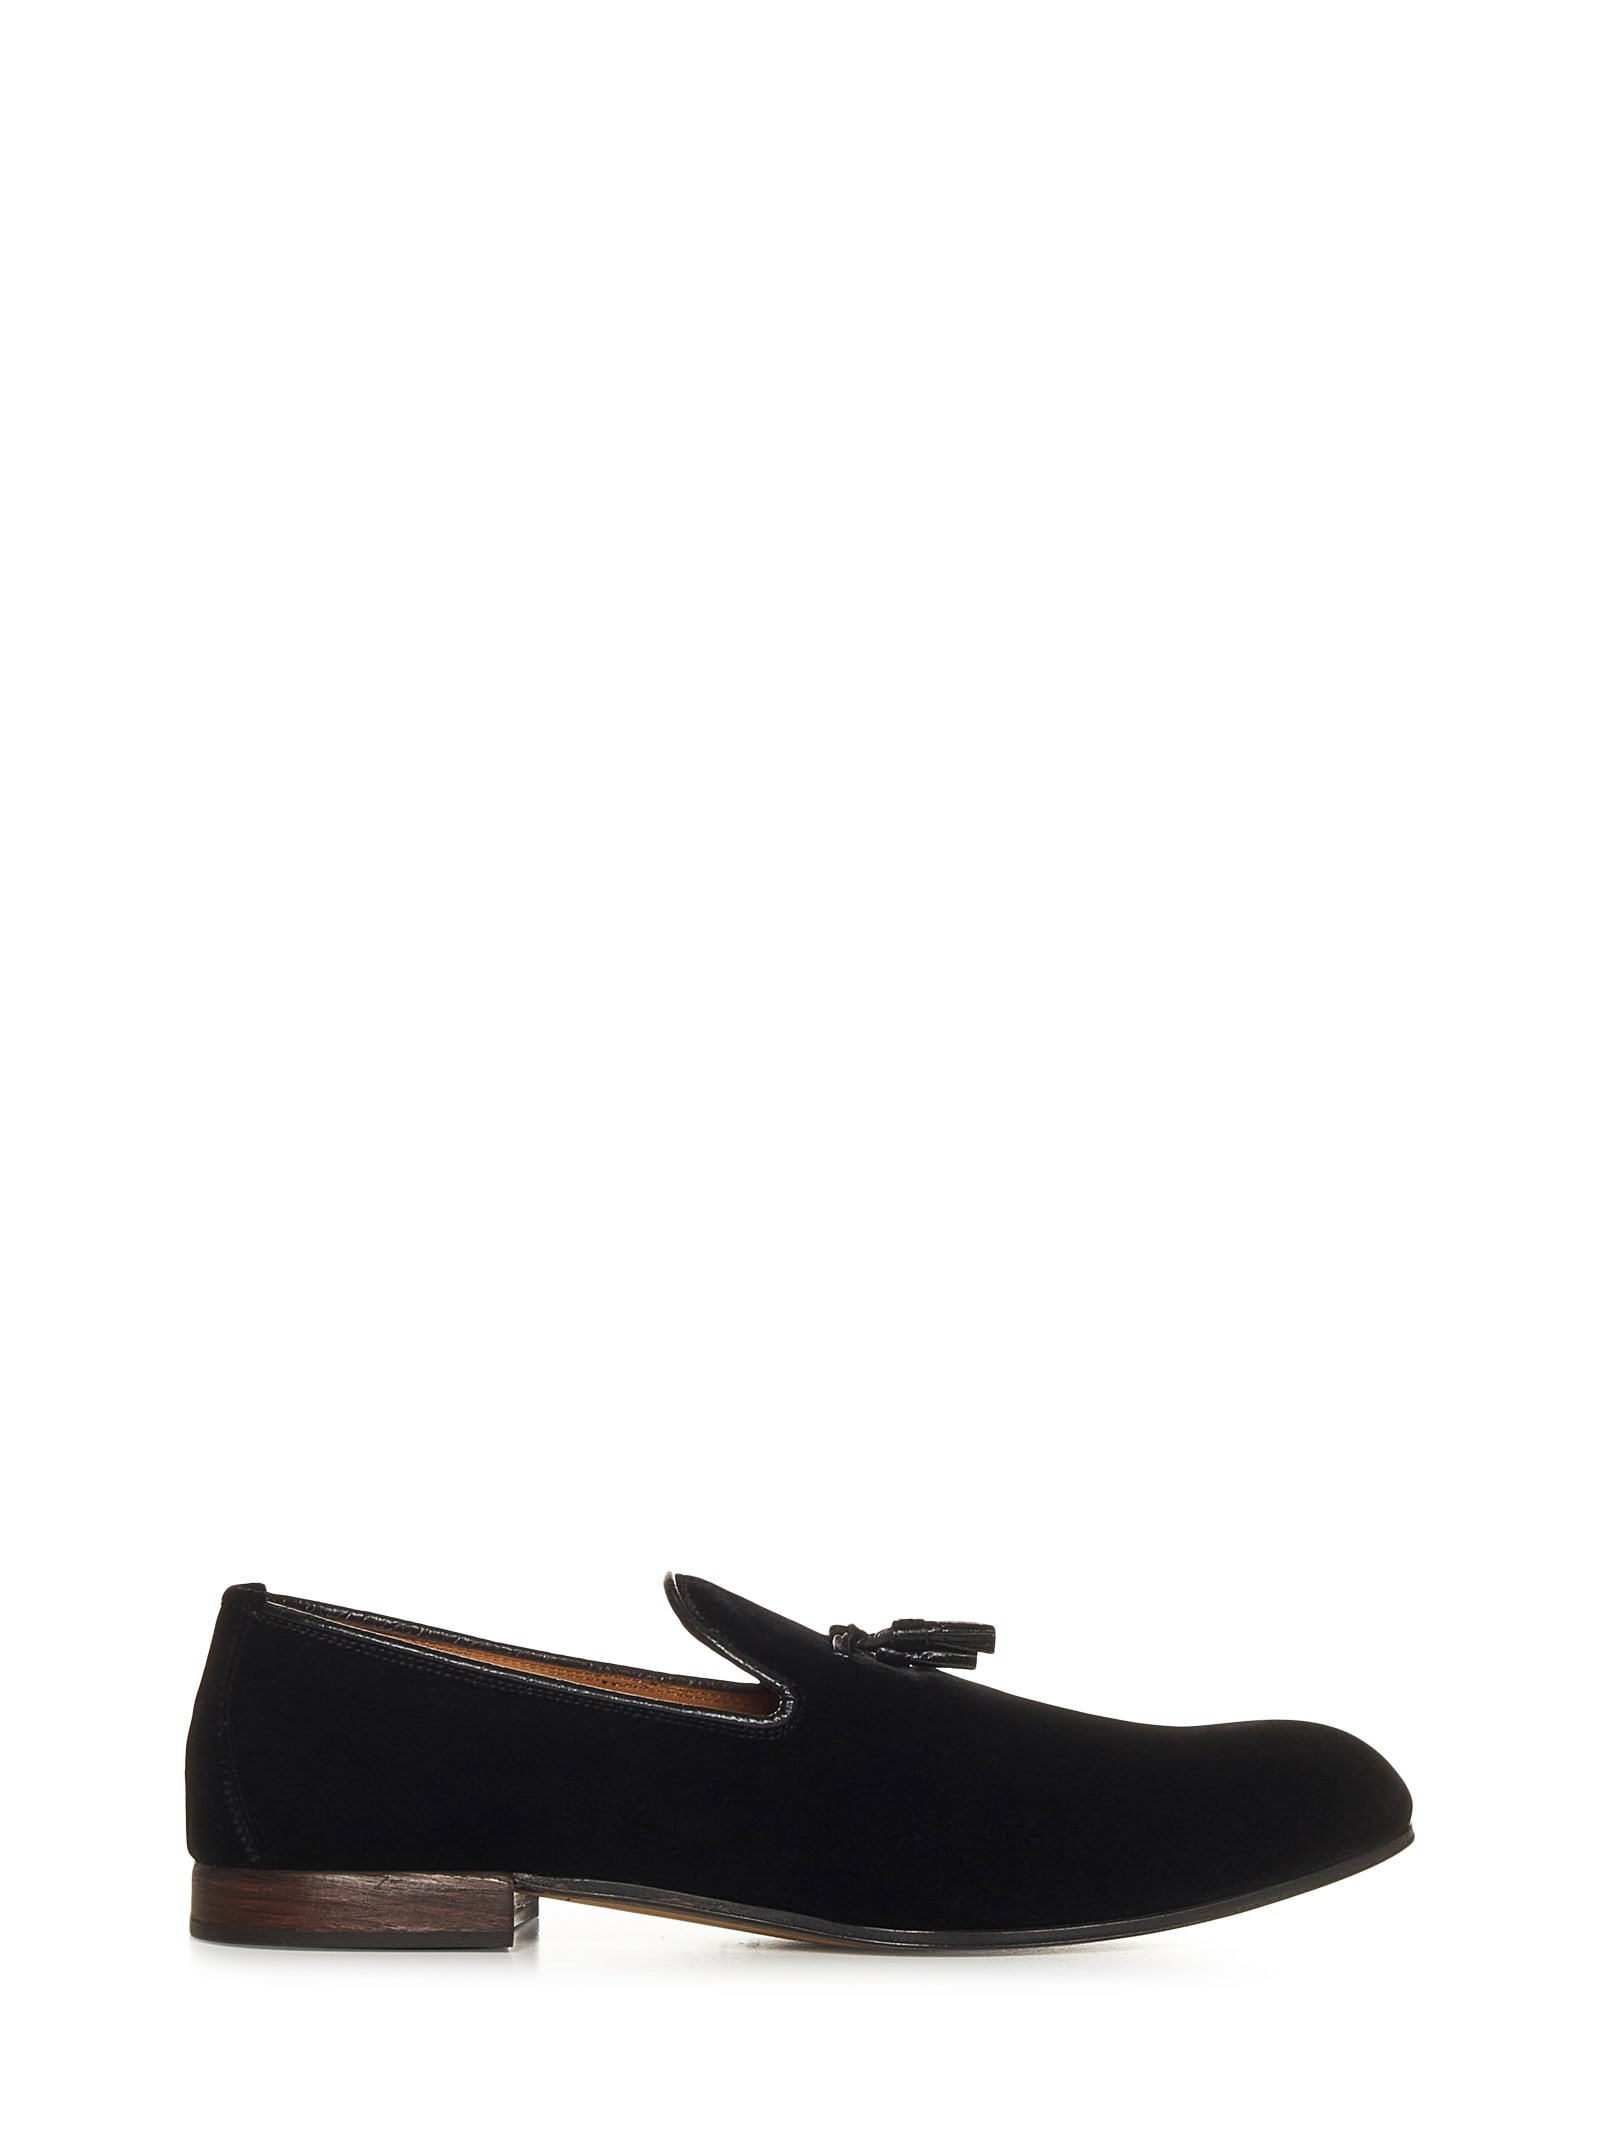 TOM FORD NICOLAS LOAFERS